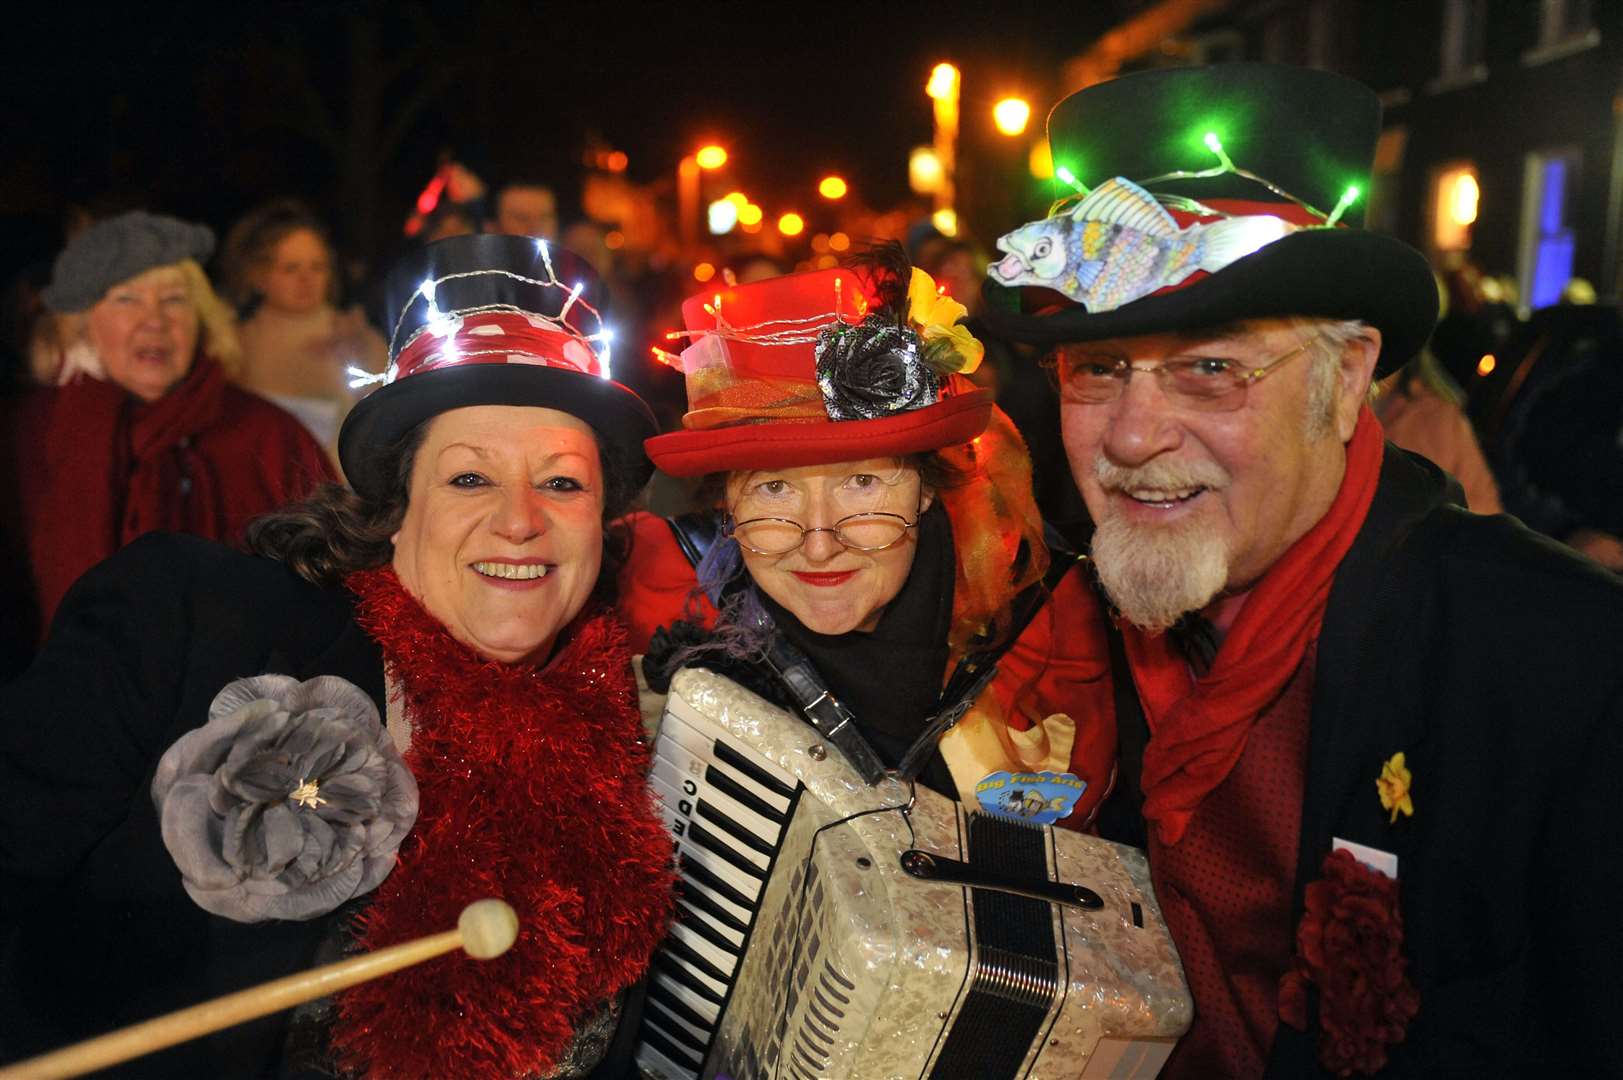 Sue Percival, Chris Reed and Jim Enright at the torchlight parade, carol service and fireworks in Queenborough